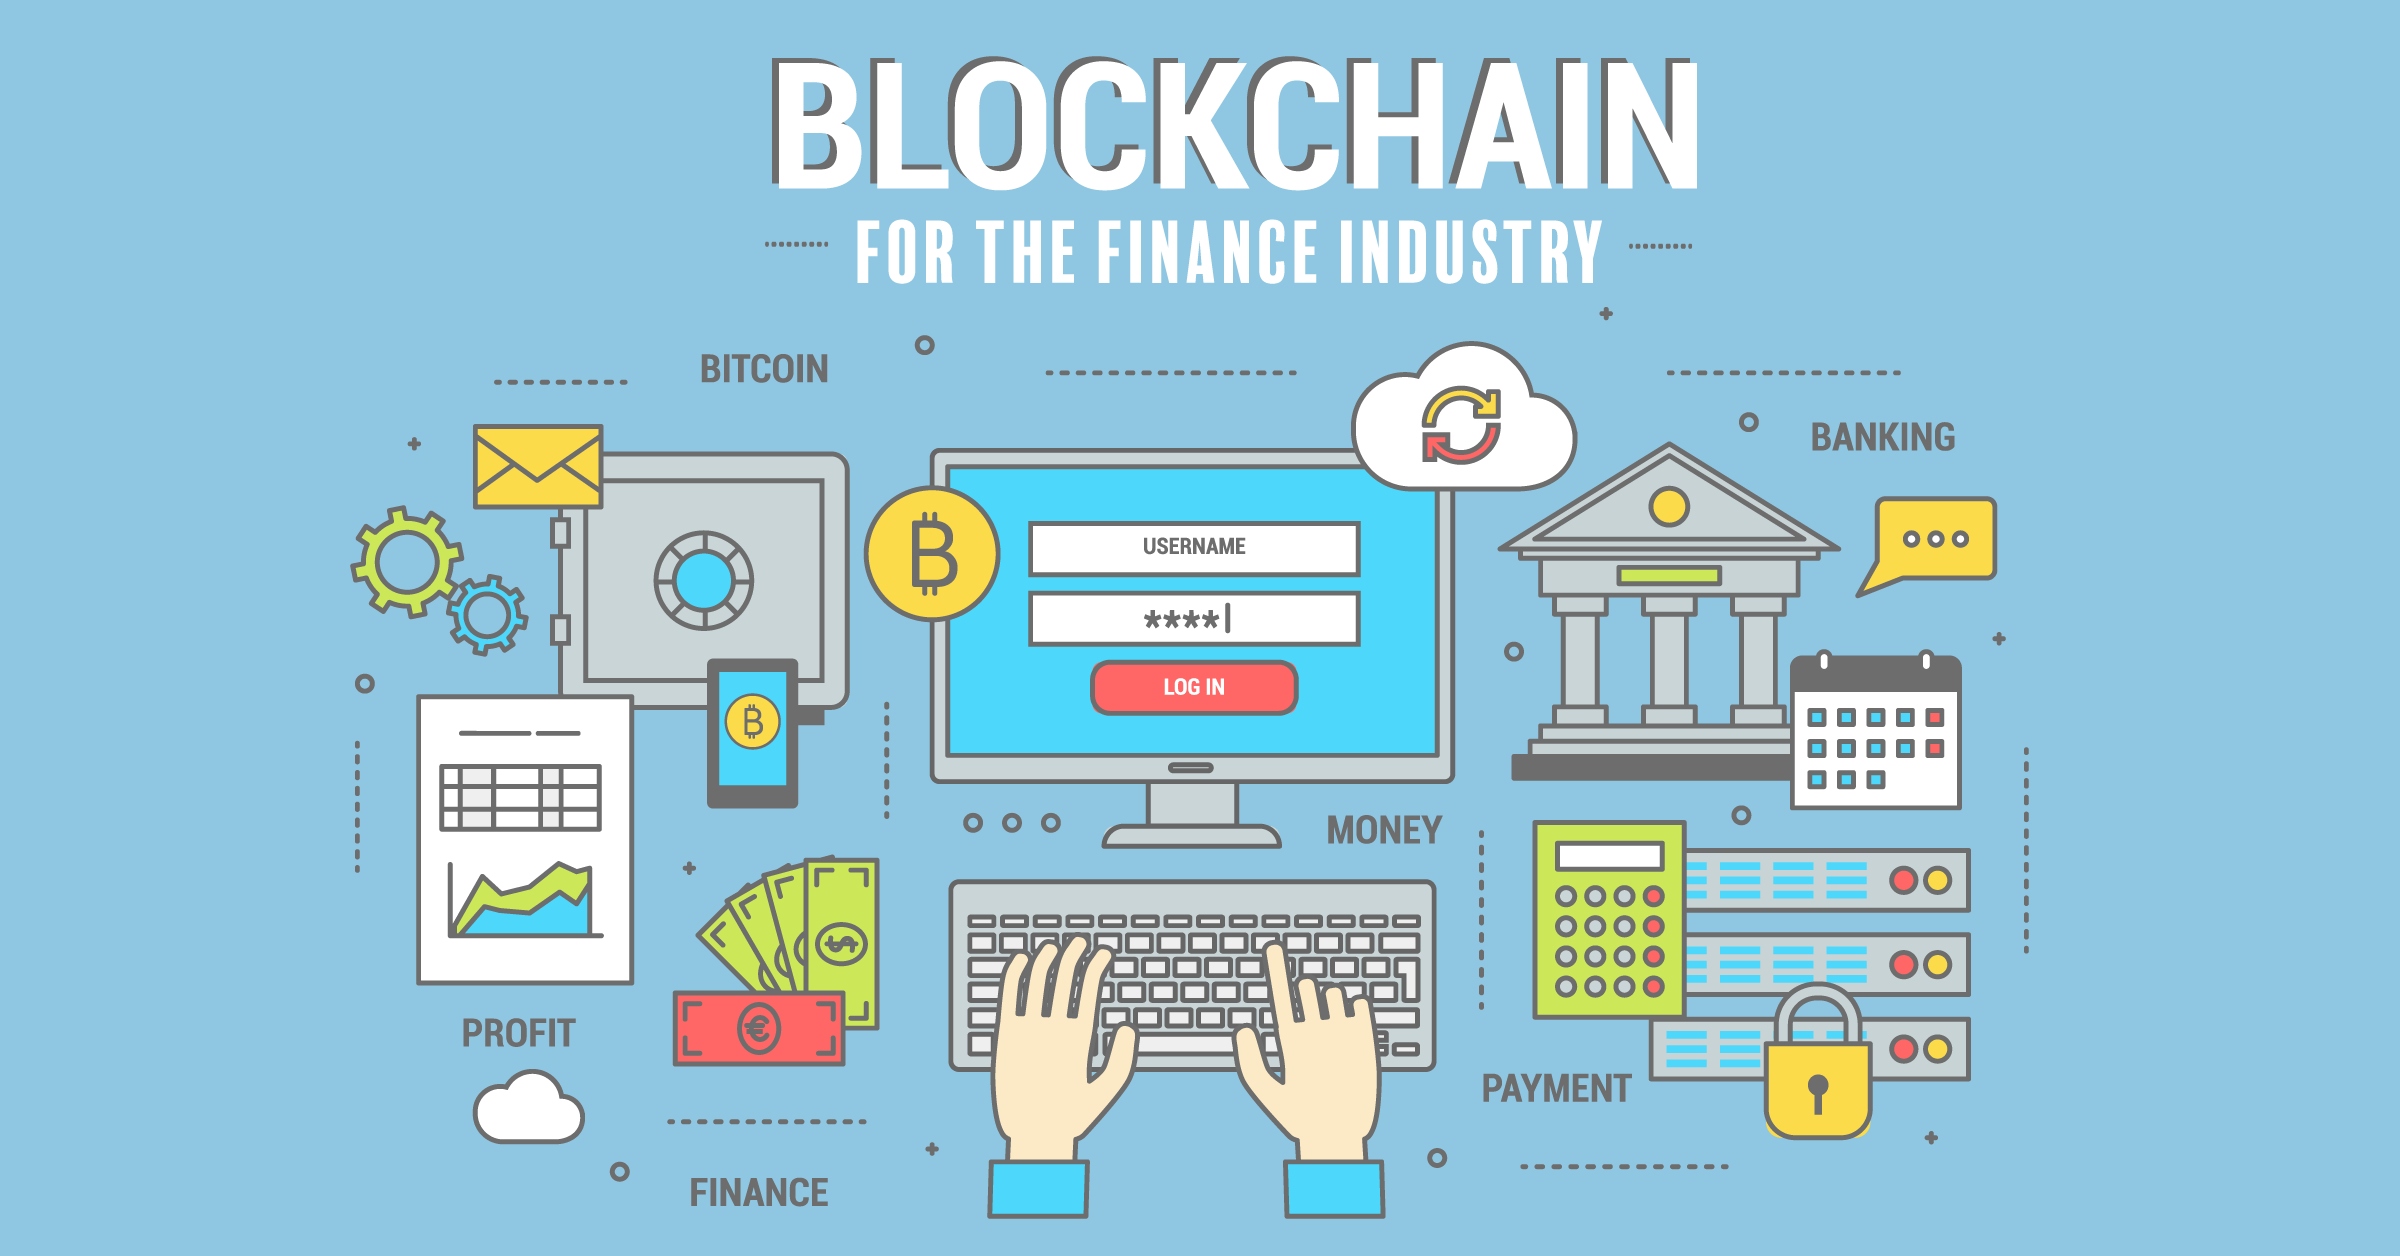 Blockchain for the Finance industry